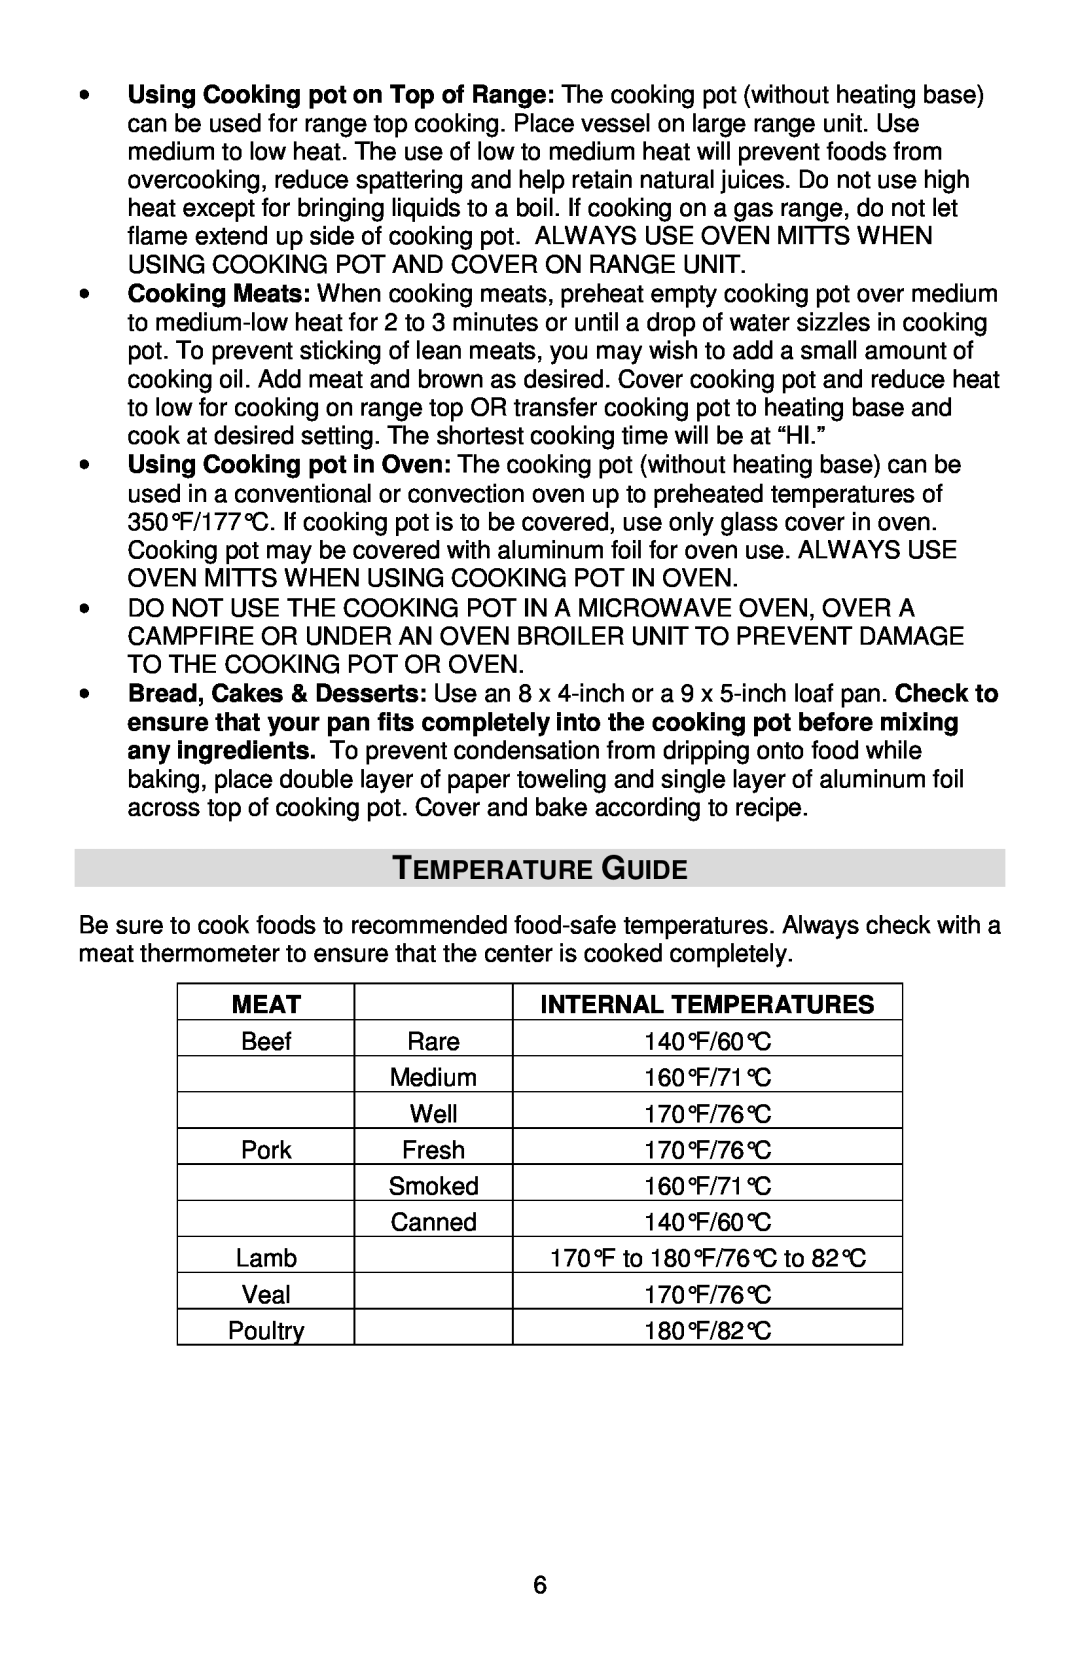 West Bend L5803A, 84906 instruction manual Temperature Guide, Meat, Internal Temperatures 